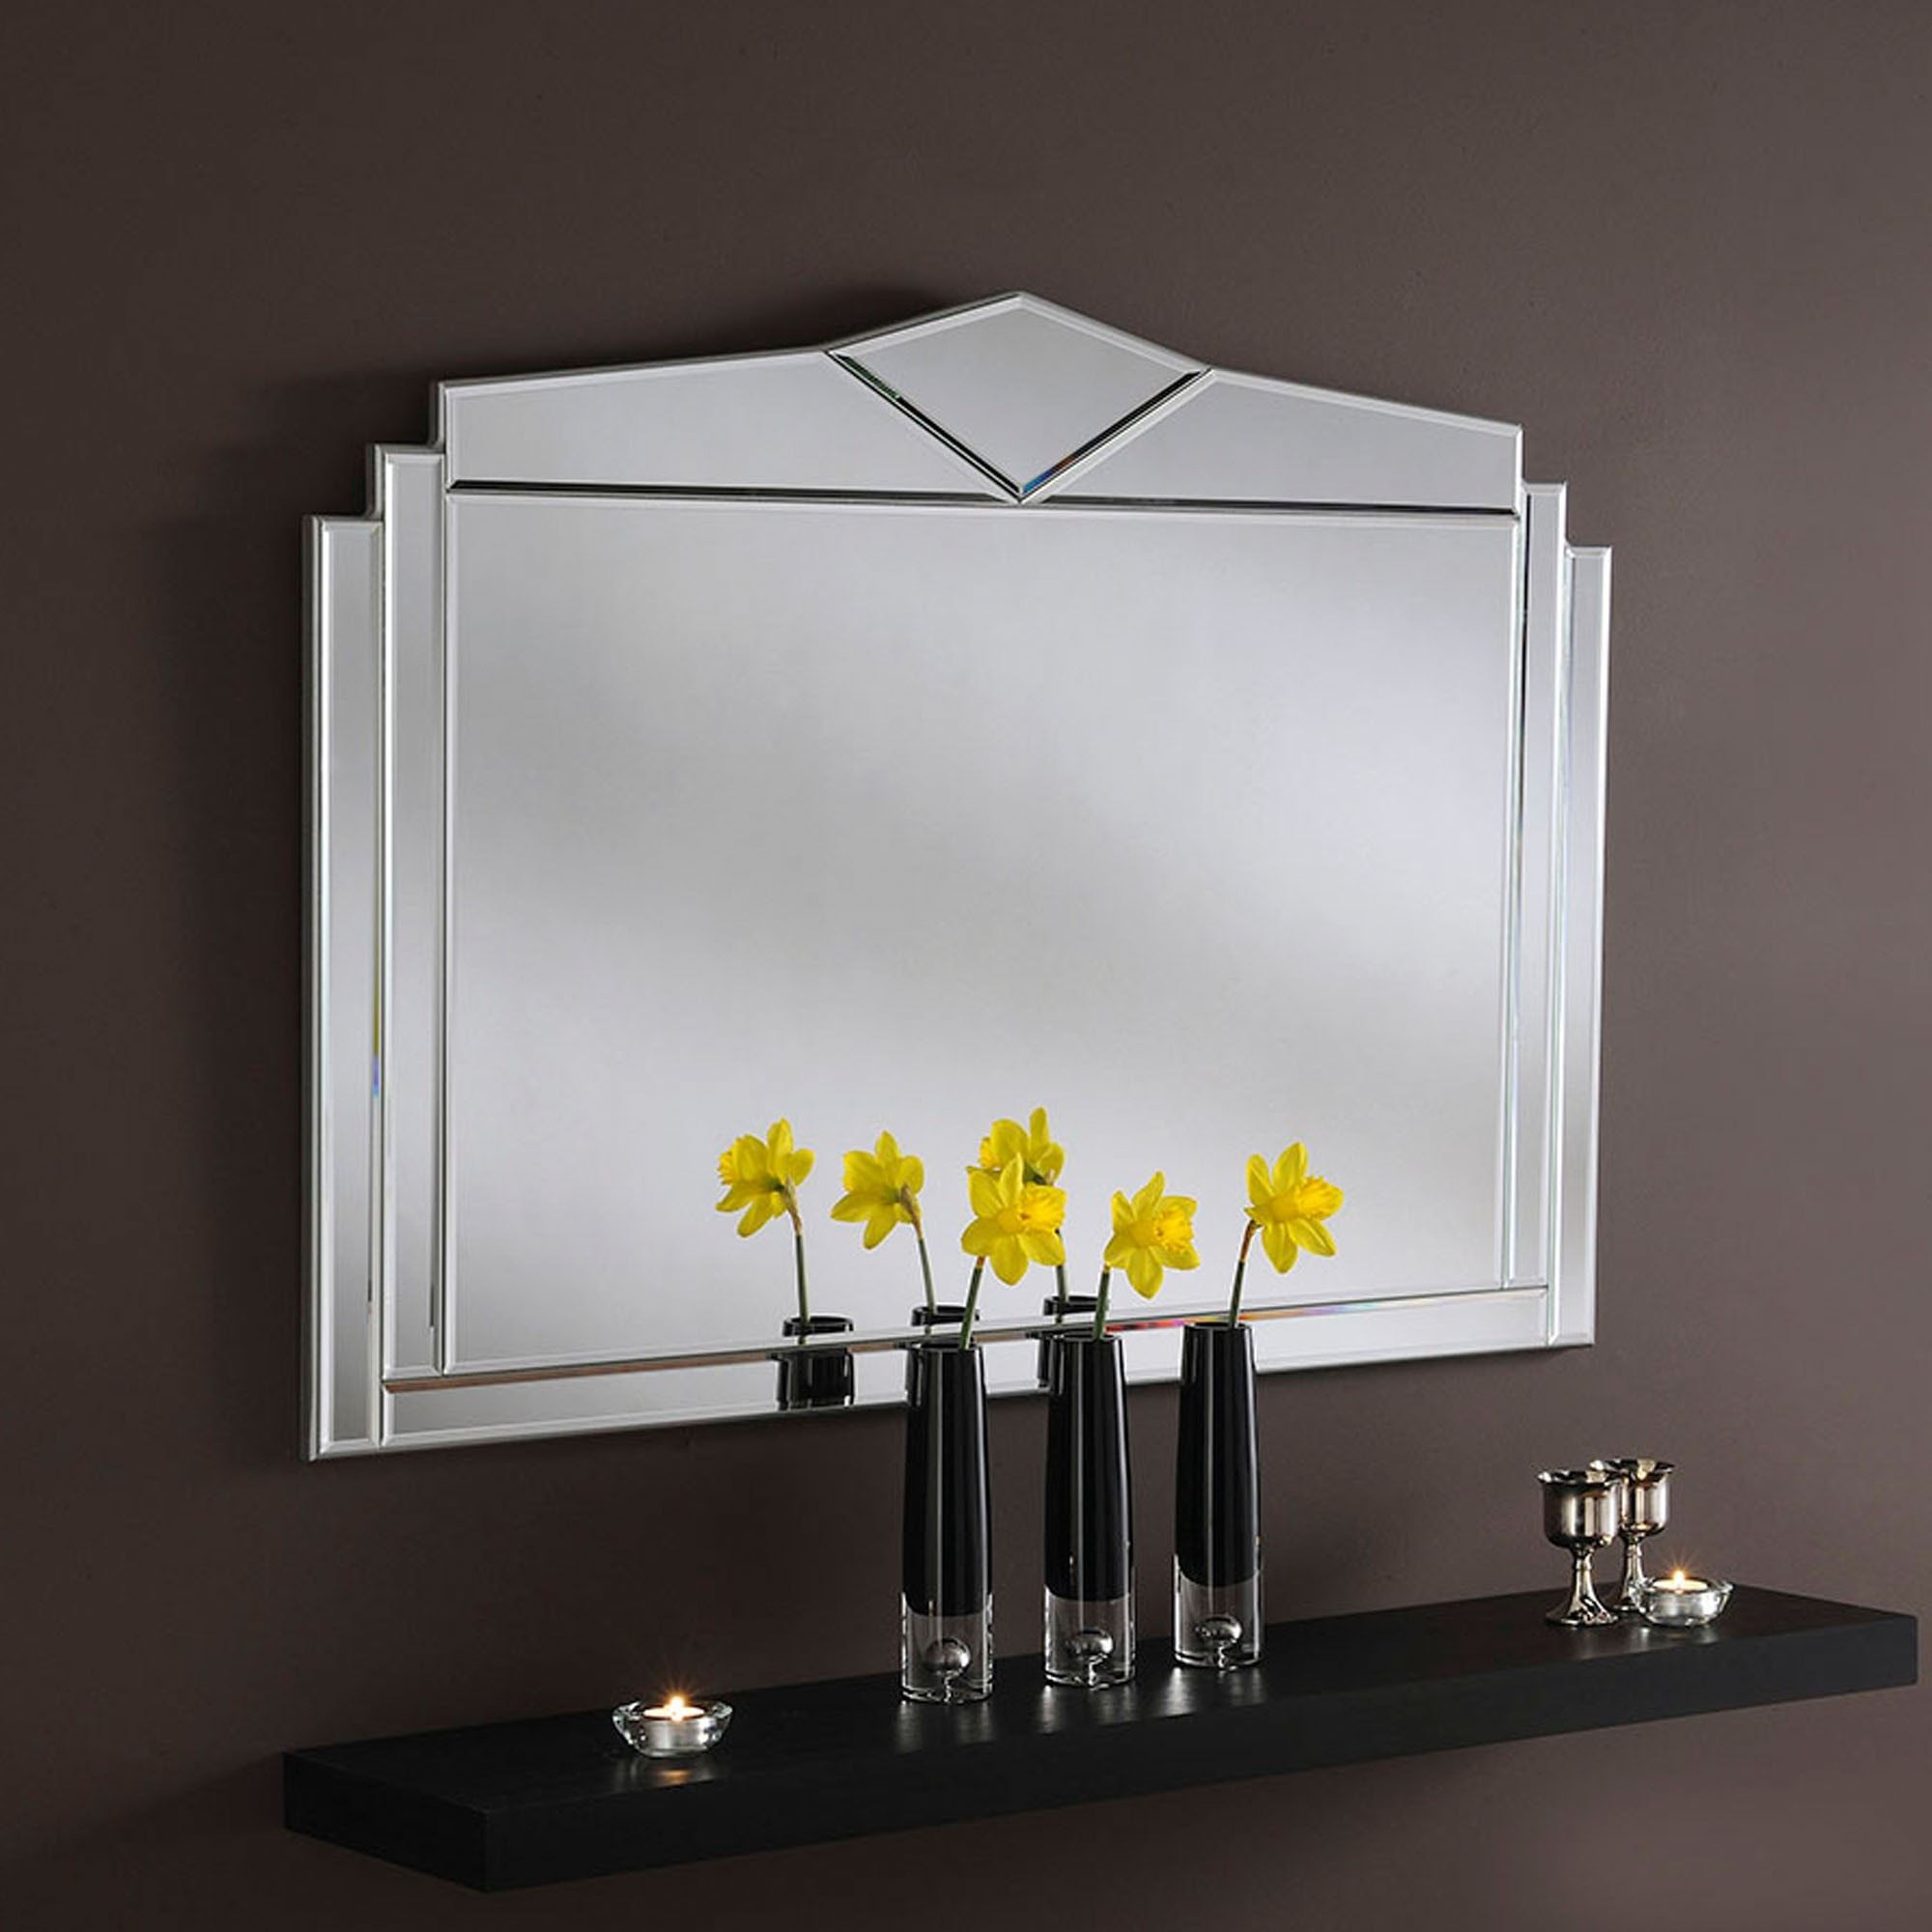 Decorative Art Deco Silver Wall Mirror | Wall Mirrors Pertaining To Silver Metal Cut Edge Wall Mirrors (View 7 of 15)